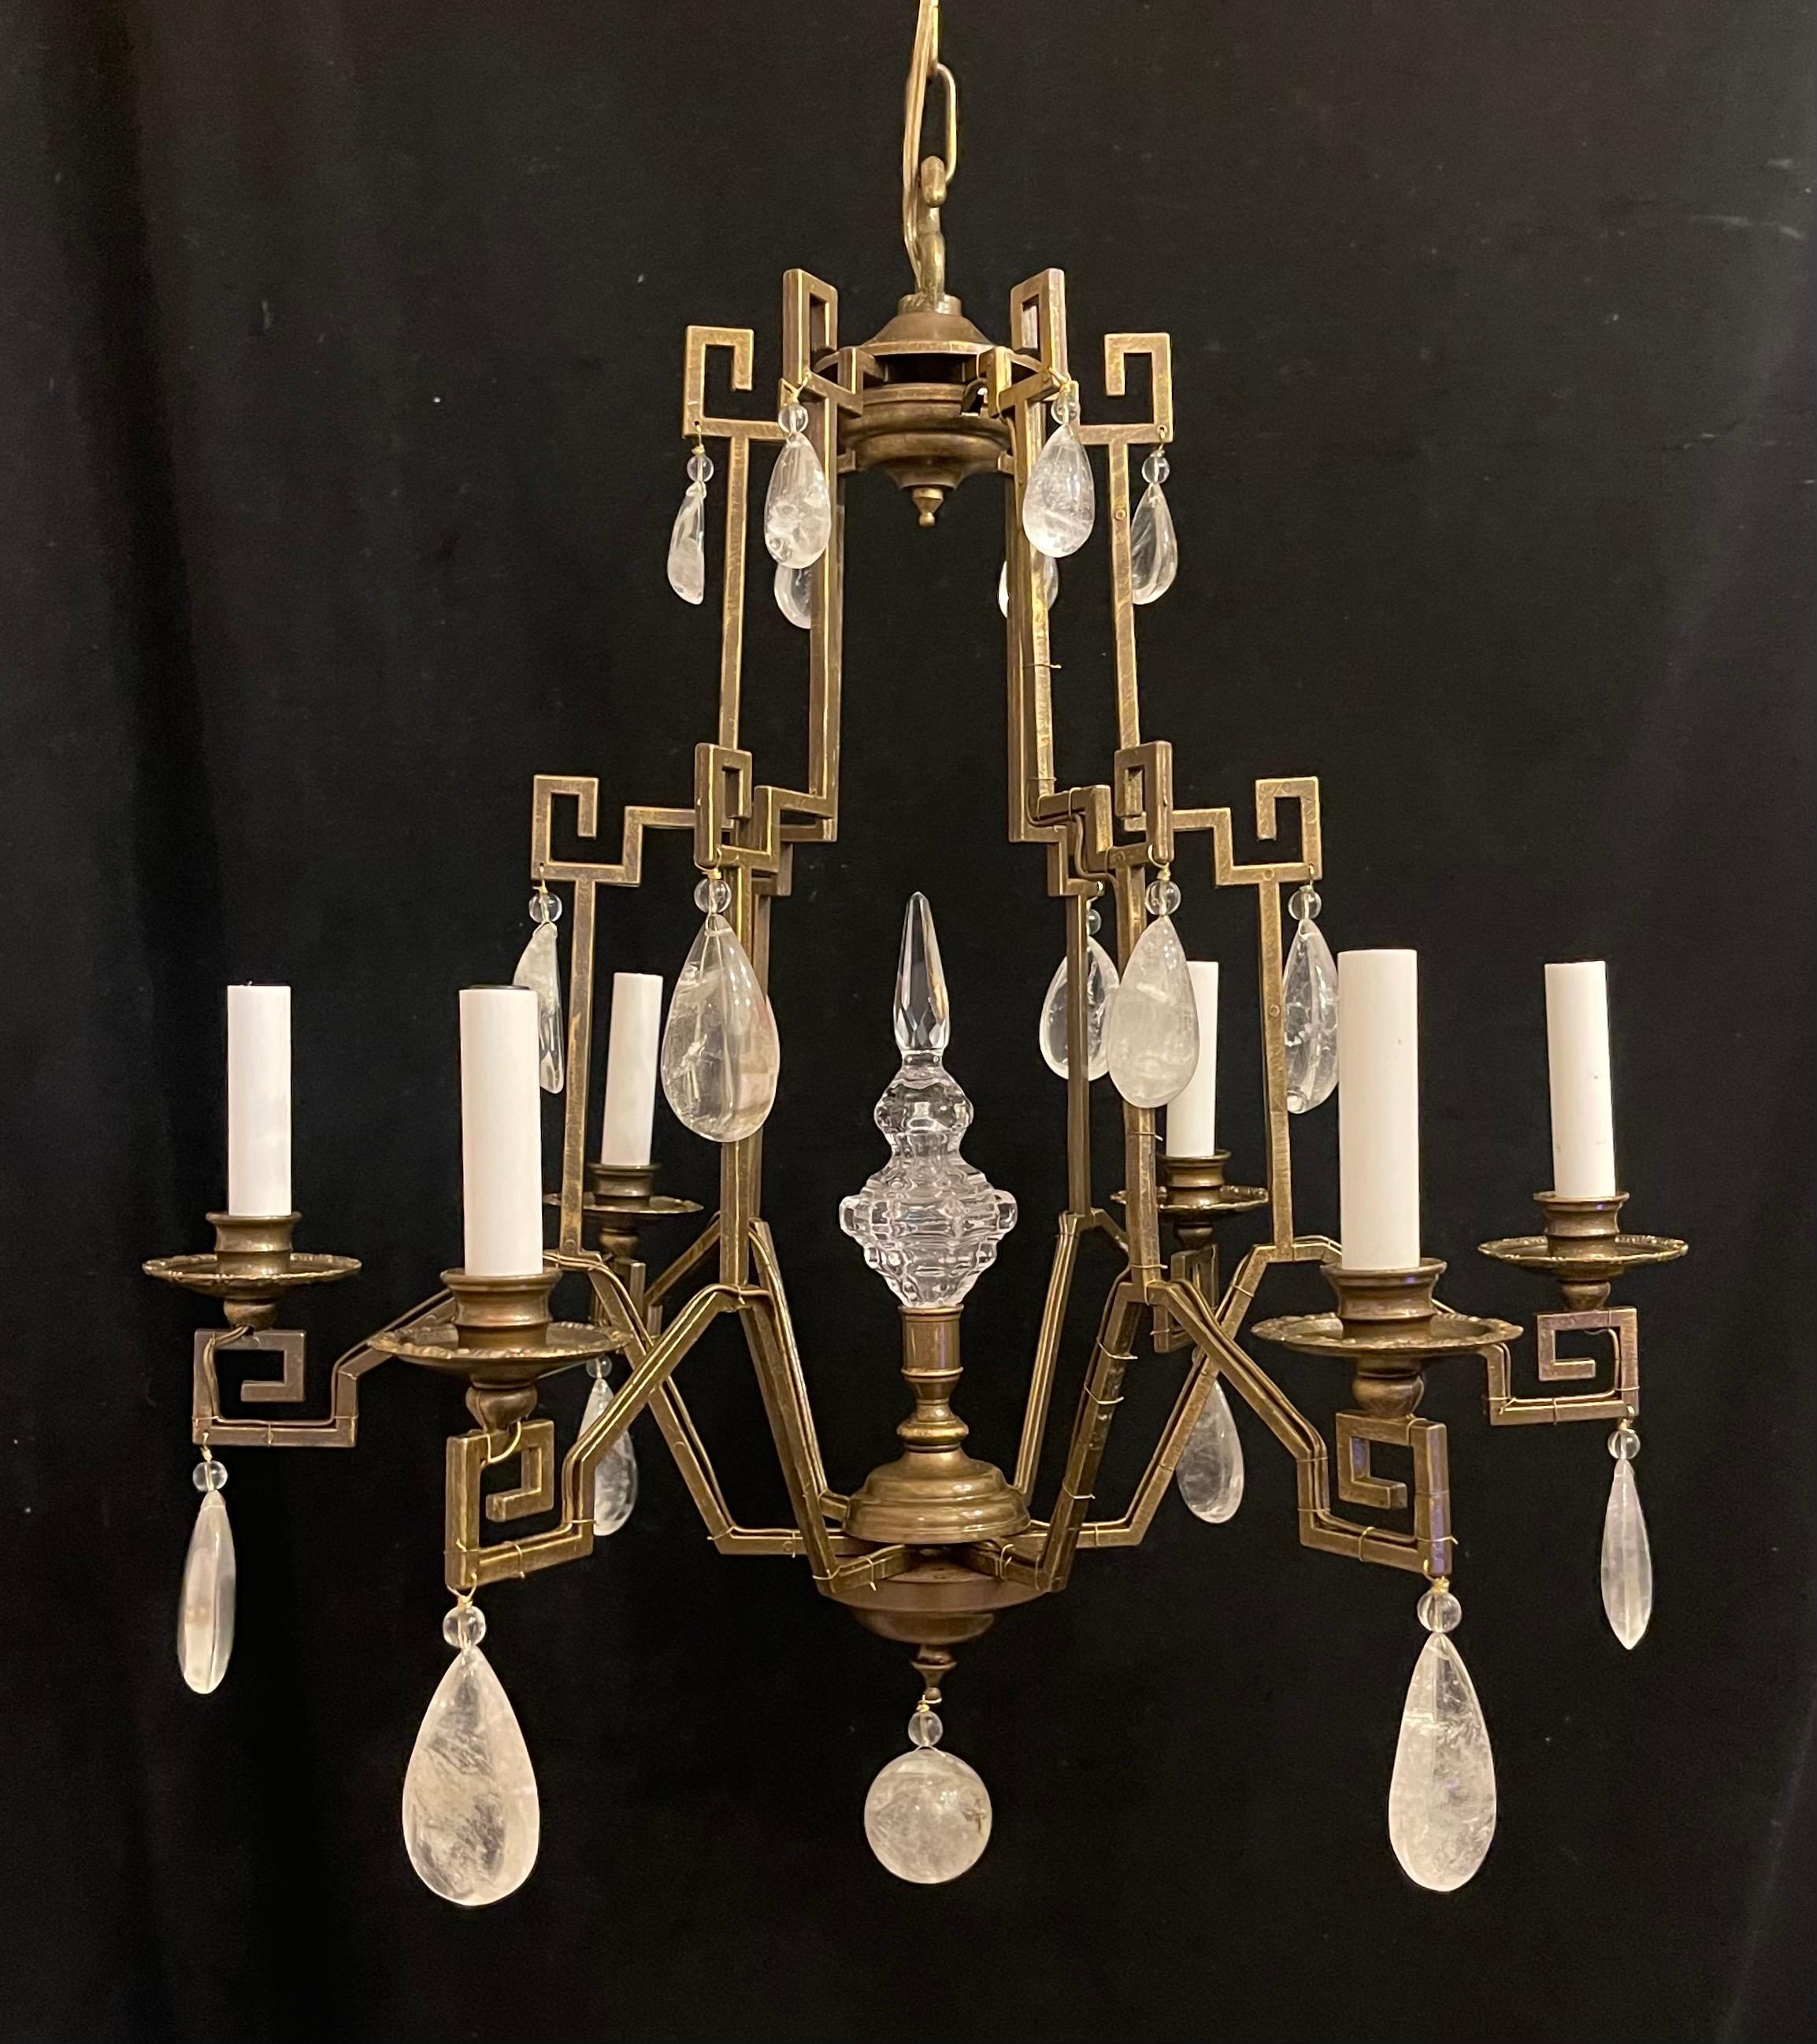 A Wonderful Six Candelabra Light Maison Baguès Style Rock Crystal Drop Pagoda Form Chinoiserie Chandelier, Rewired With New Sockets And Comes Ready To Install With Chain And Canopy